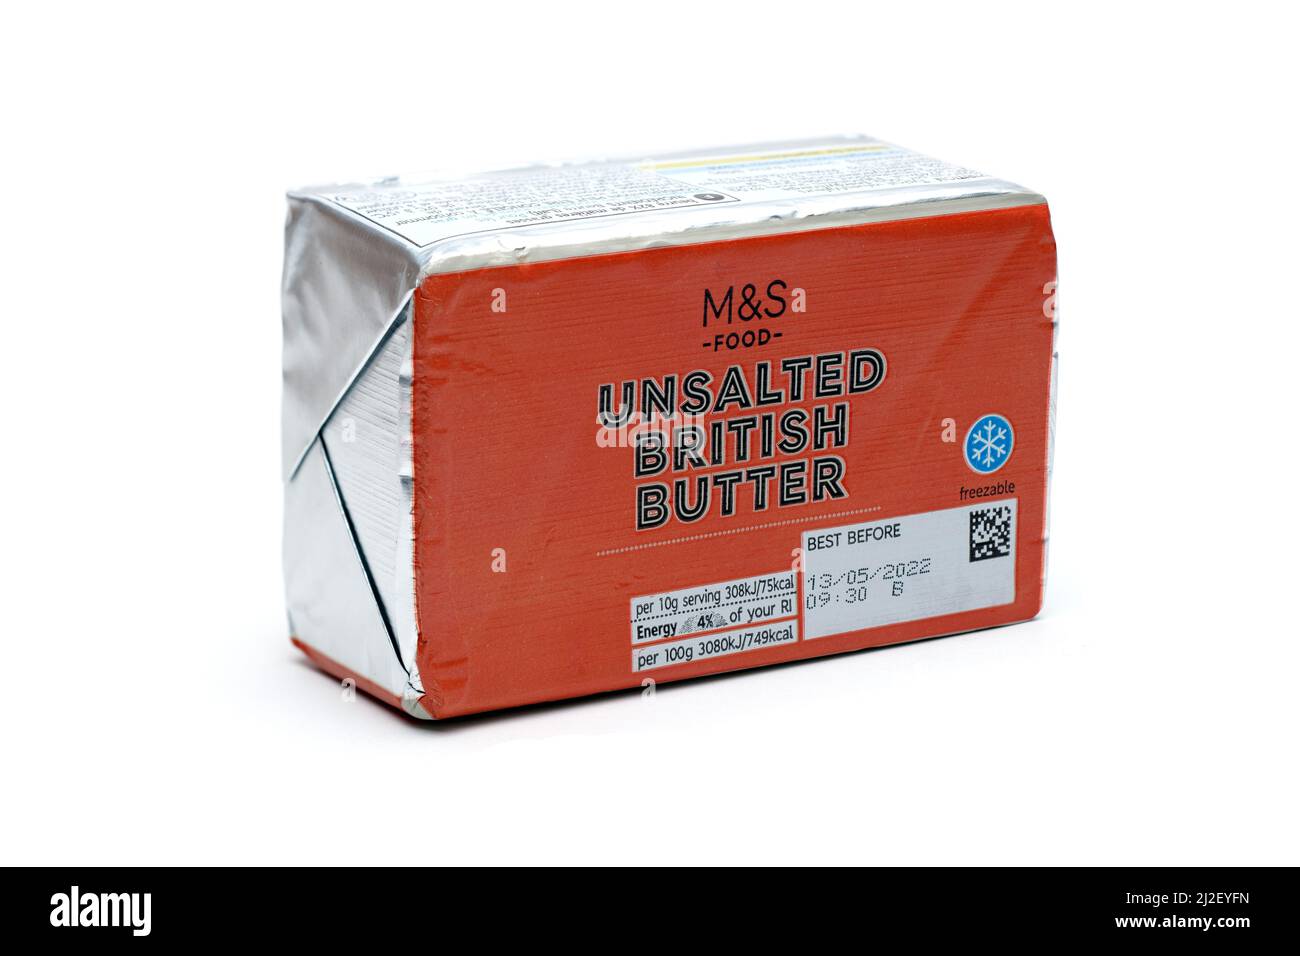 Marks and Spencer Unsalted British Butter Stock Photo